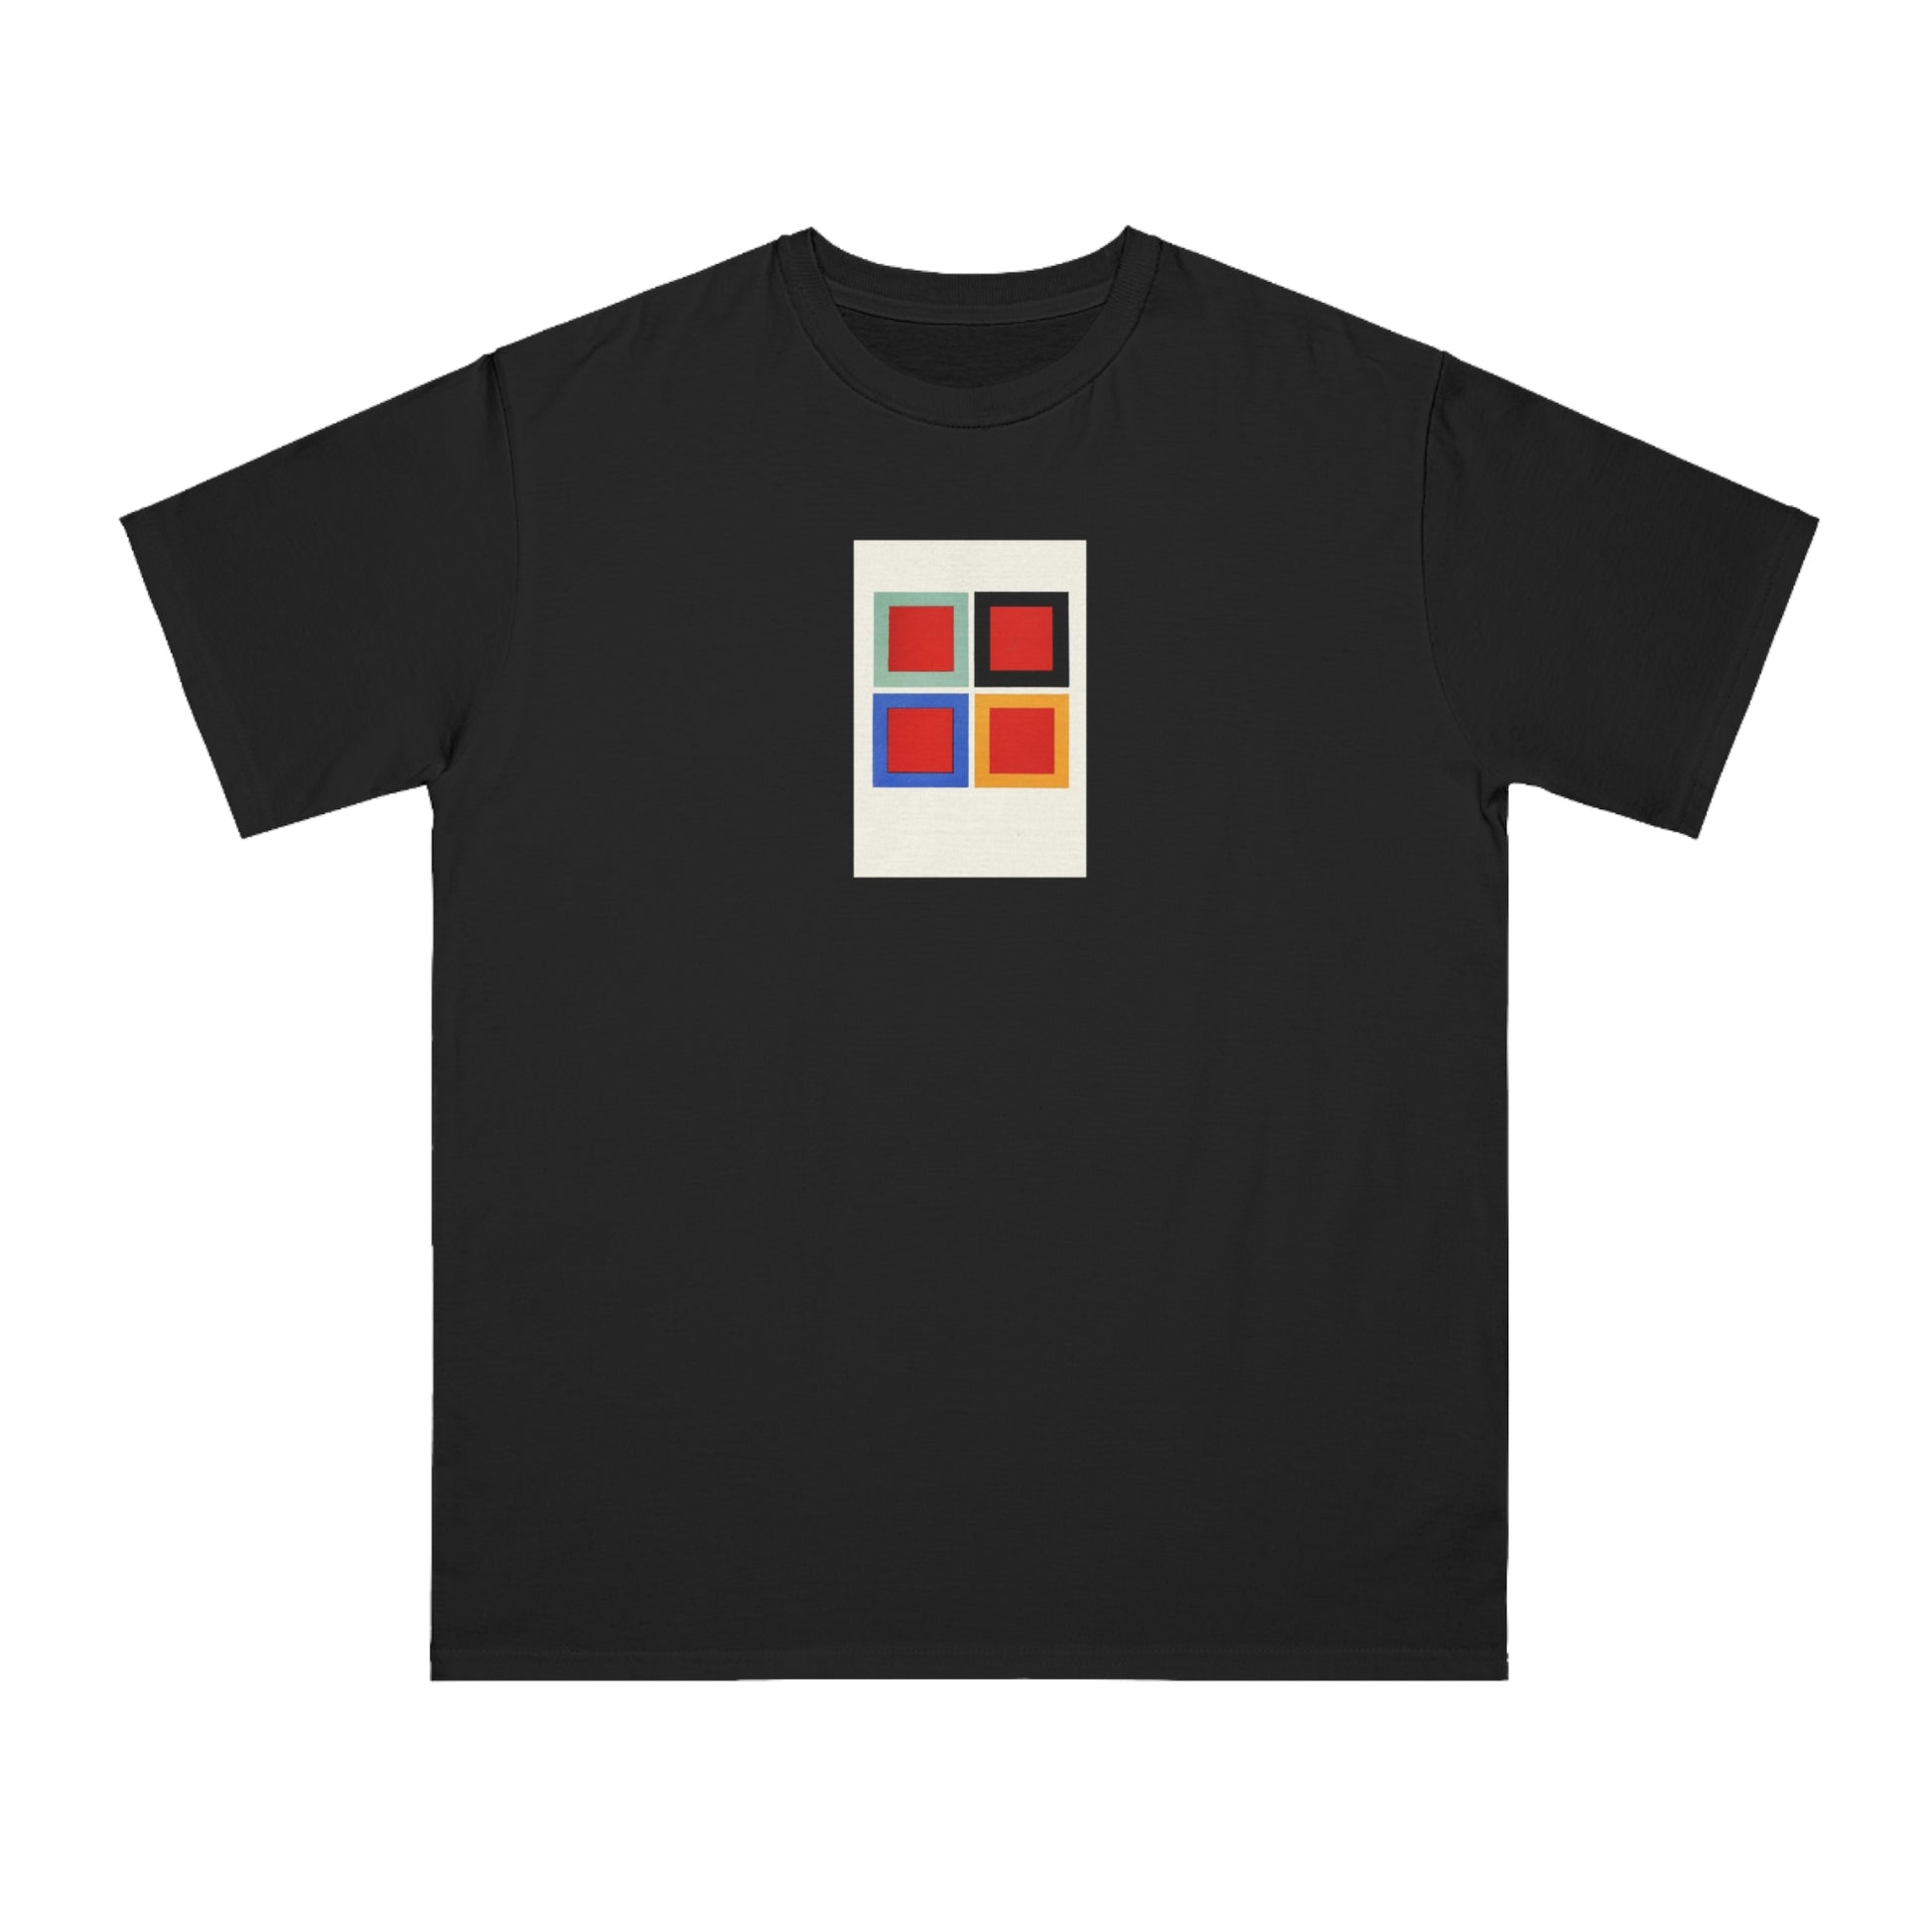 a black t - shirt with a red, yellow, and blue square design